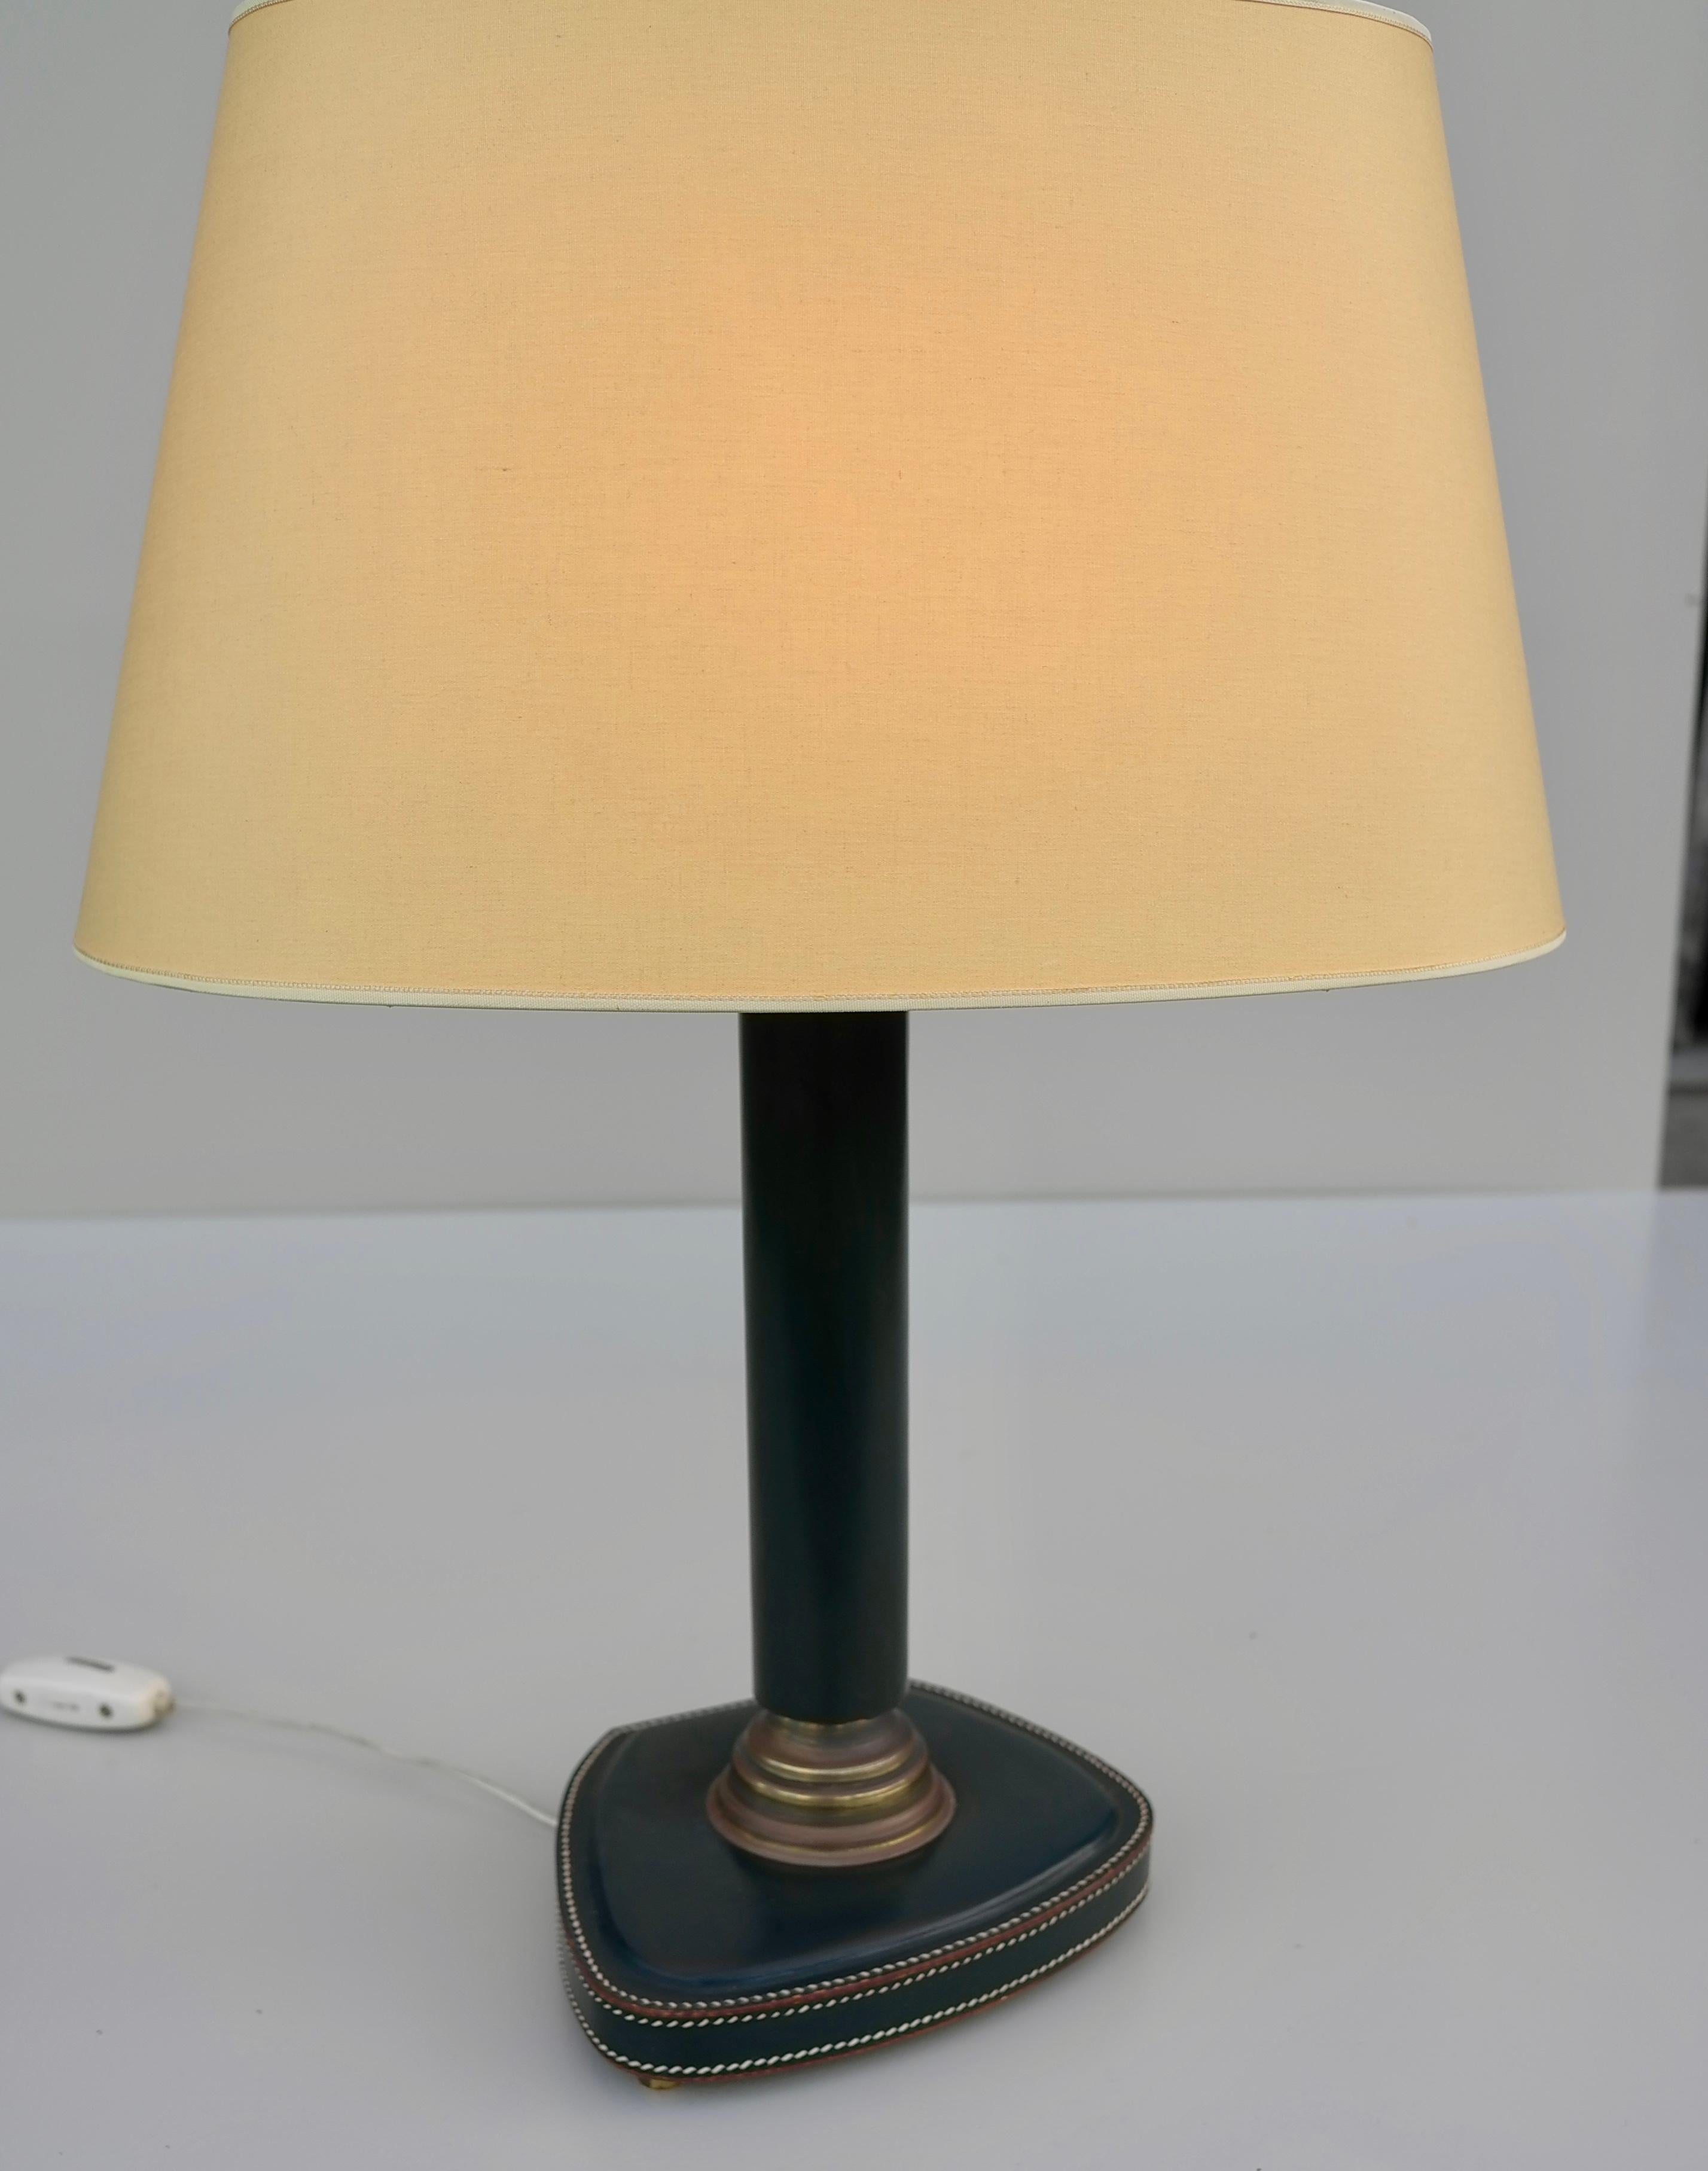 20th Century Hand-Stitched Green Leather Table Lamp, France, 1960s For Sale